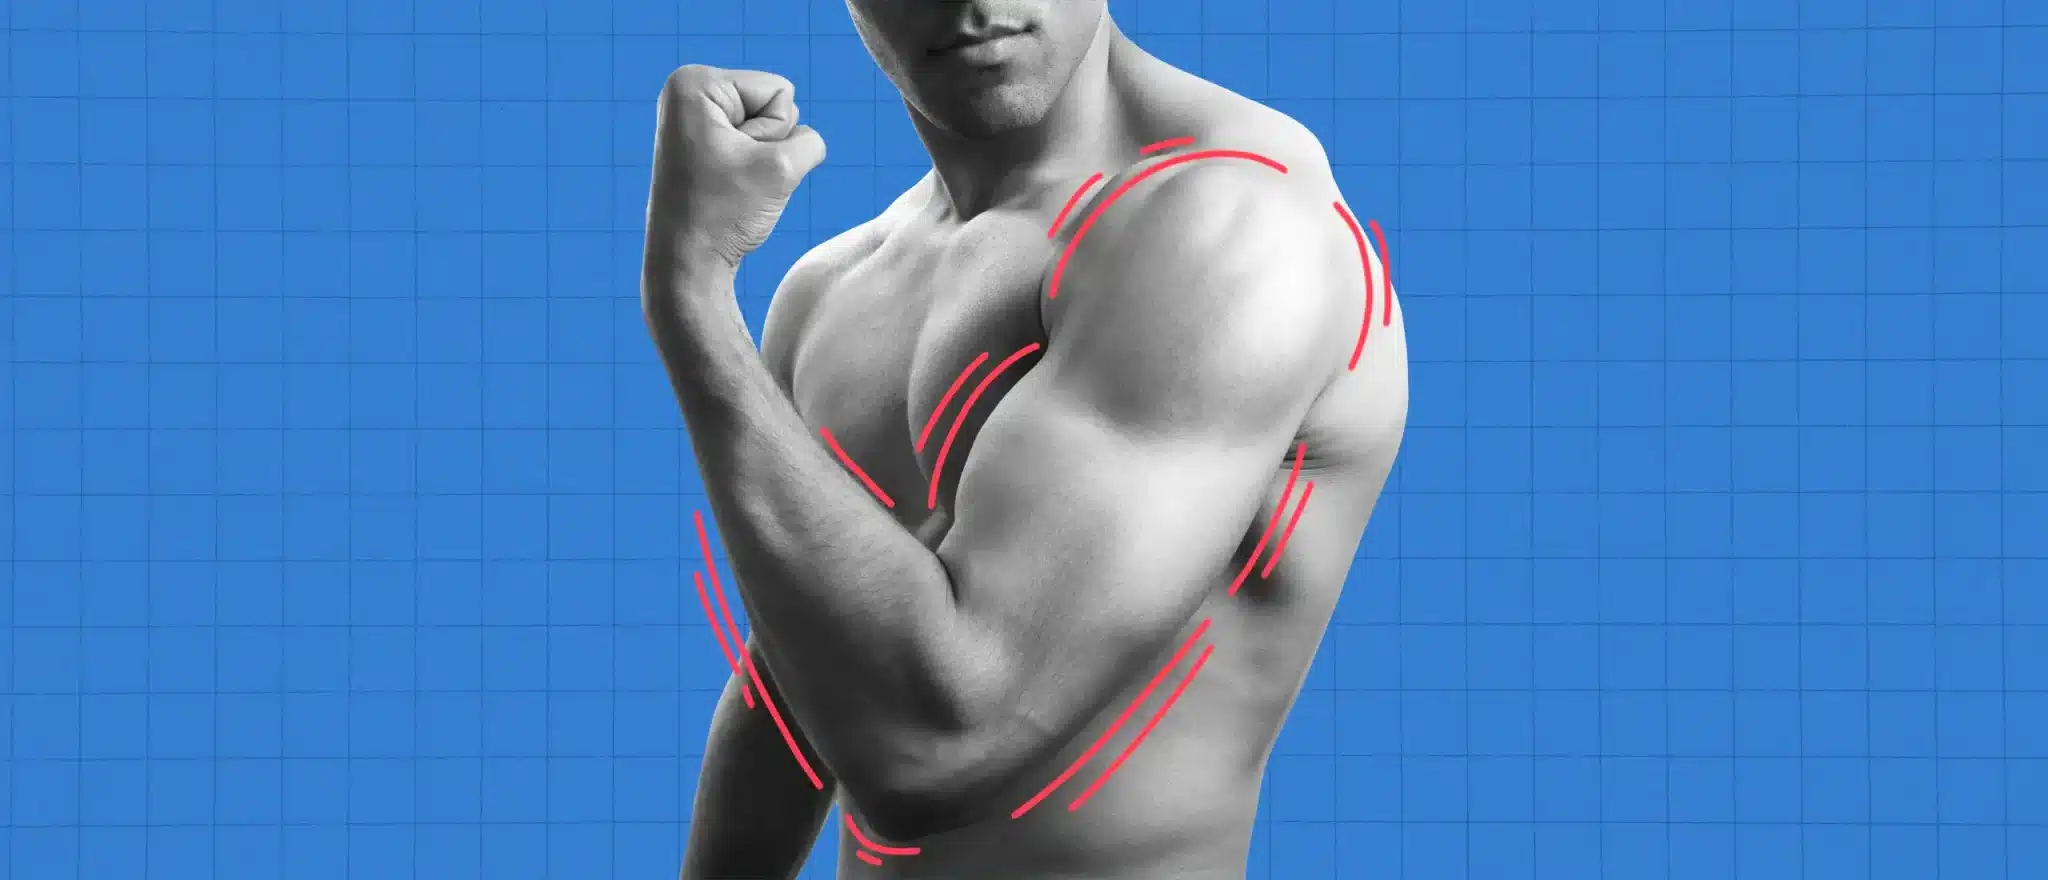 Can Flexing Your Muscles Make Them Stronger?